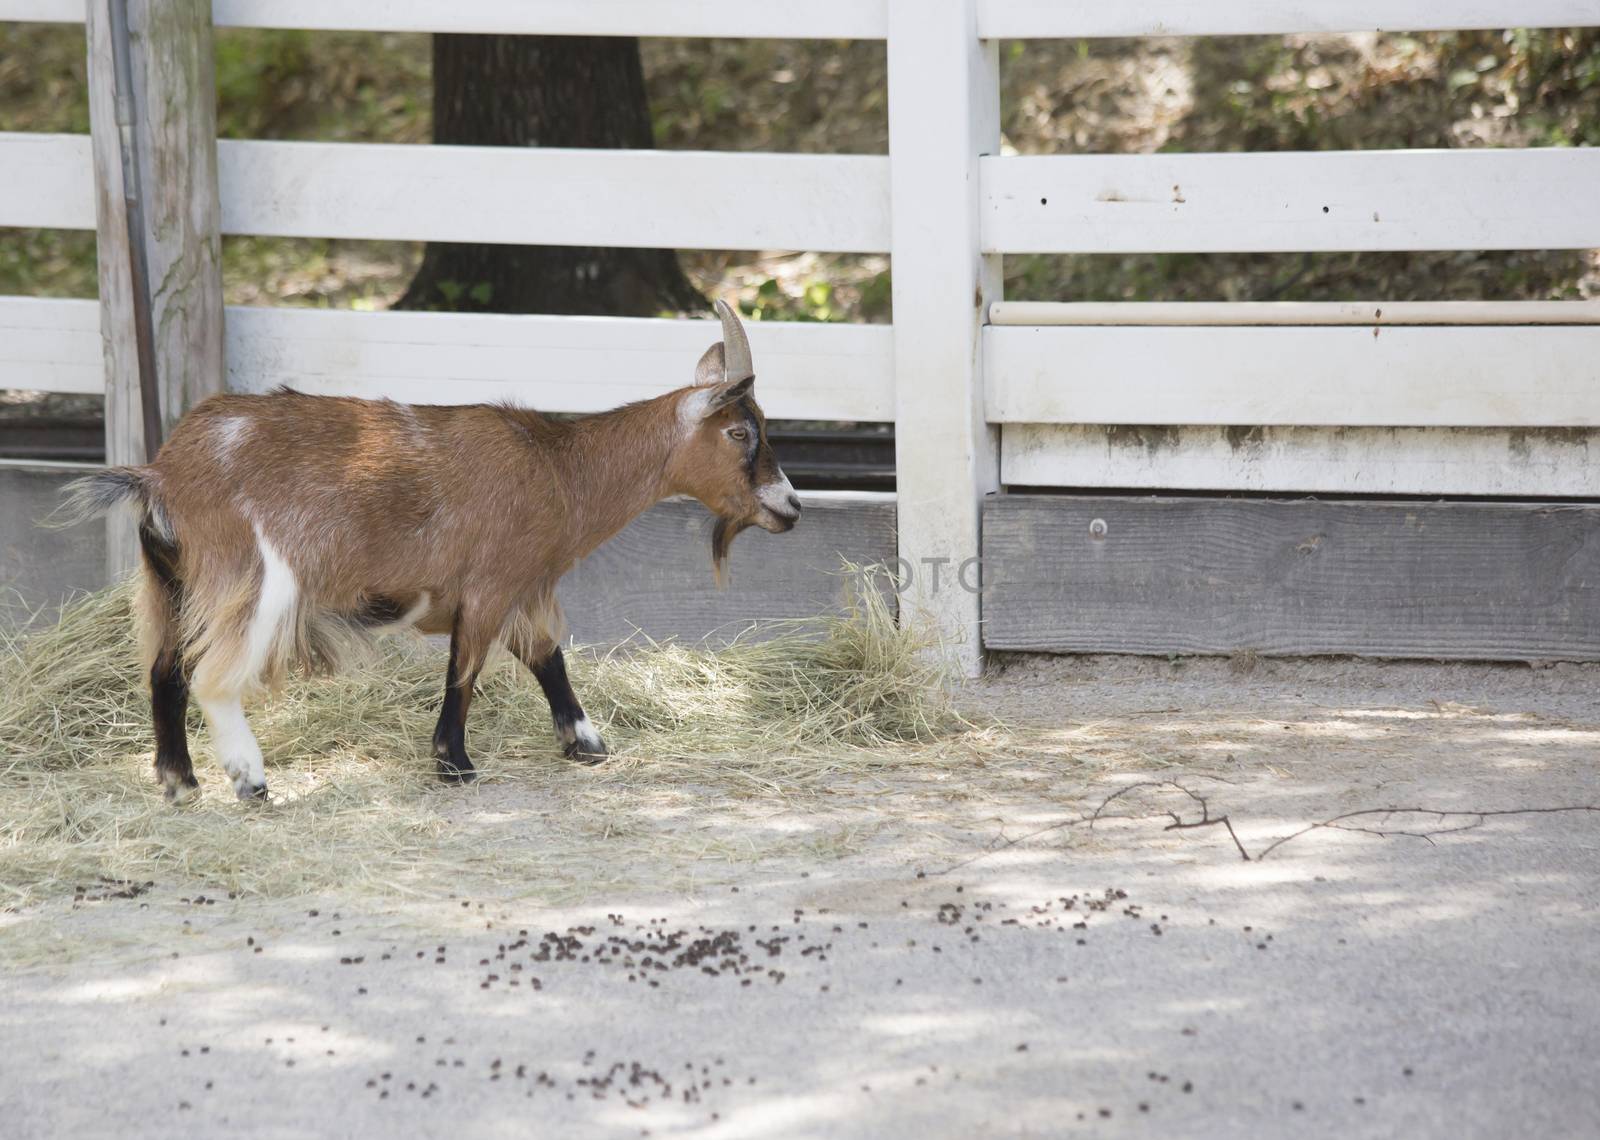 Brown goat at a feeding area